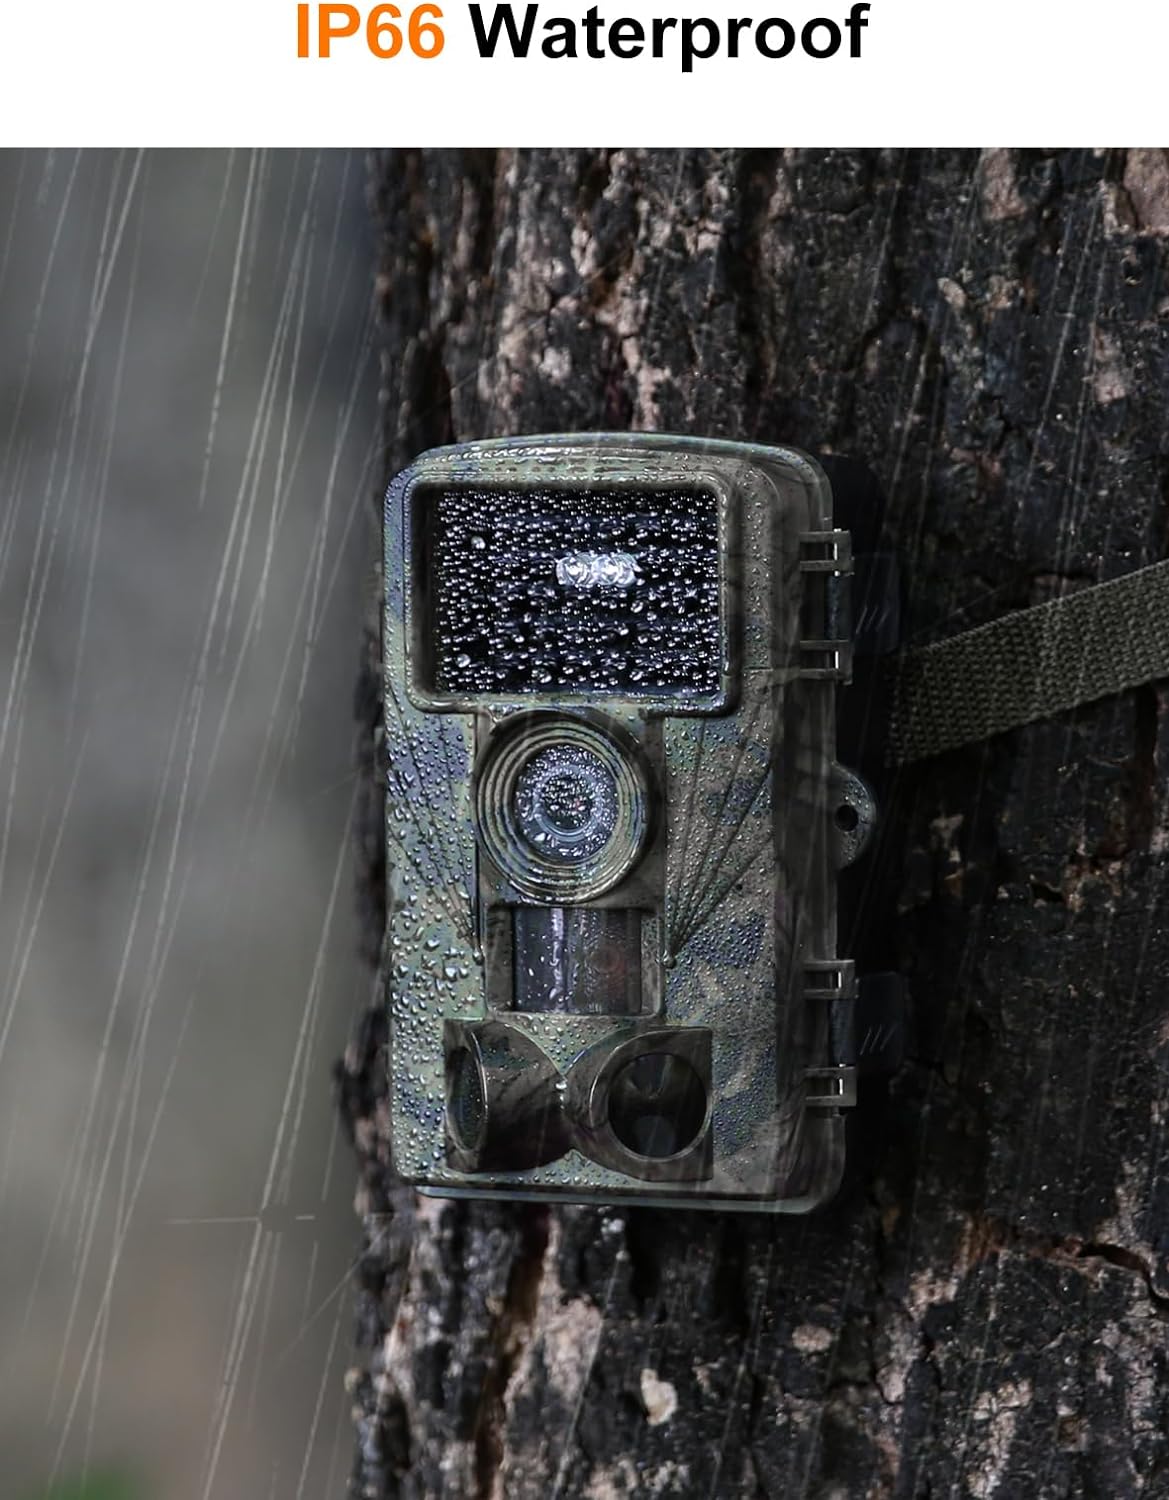 Trail Camera - 4K 48MP Game Camera with Night Vision